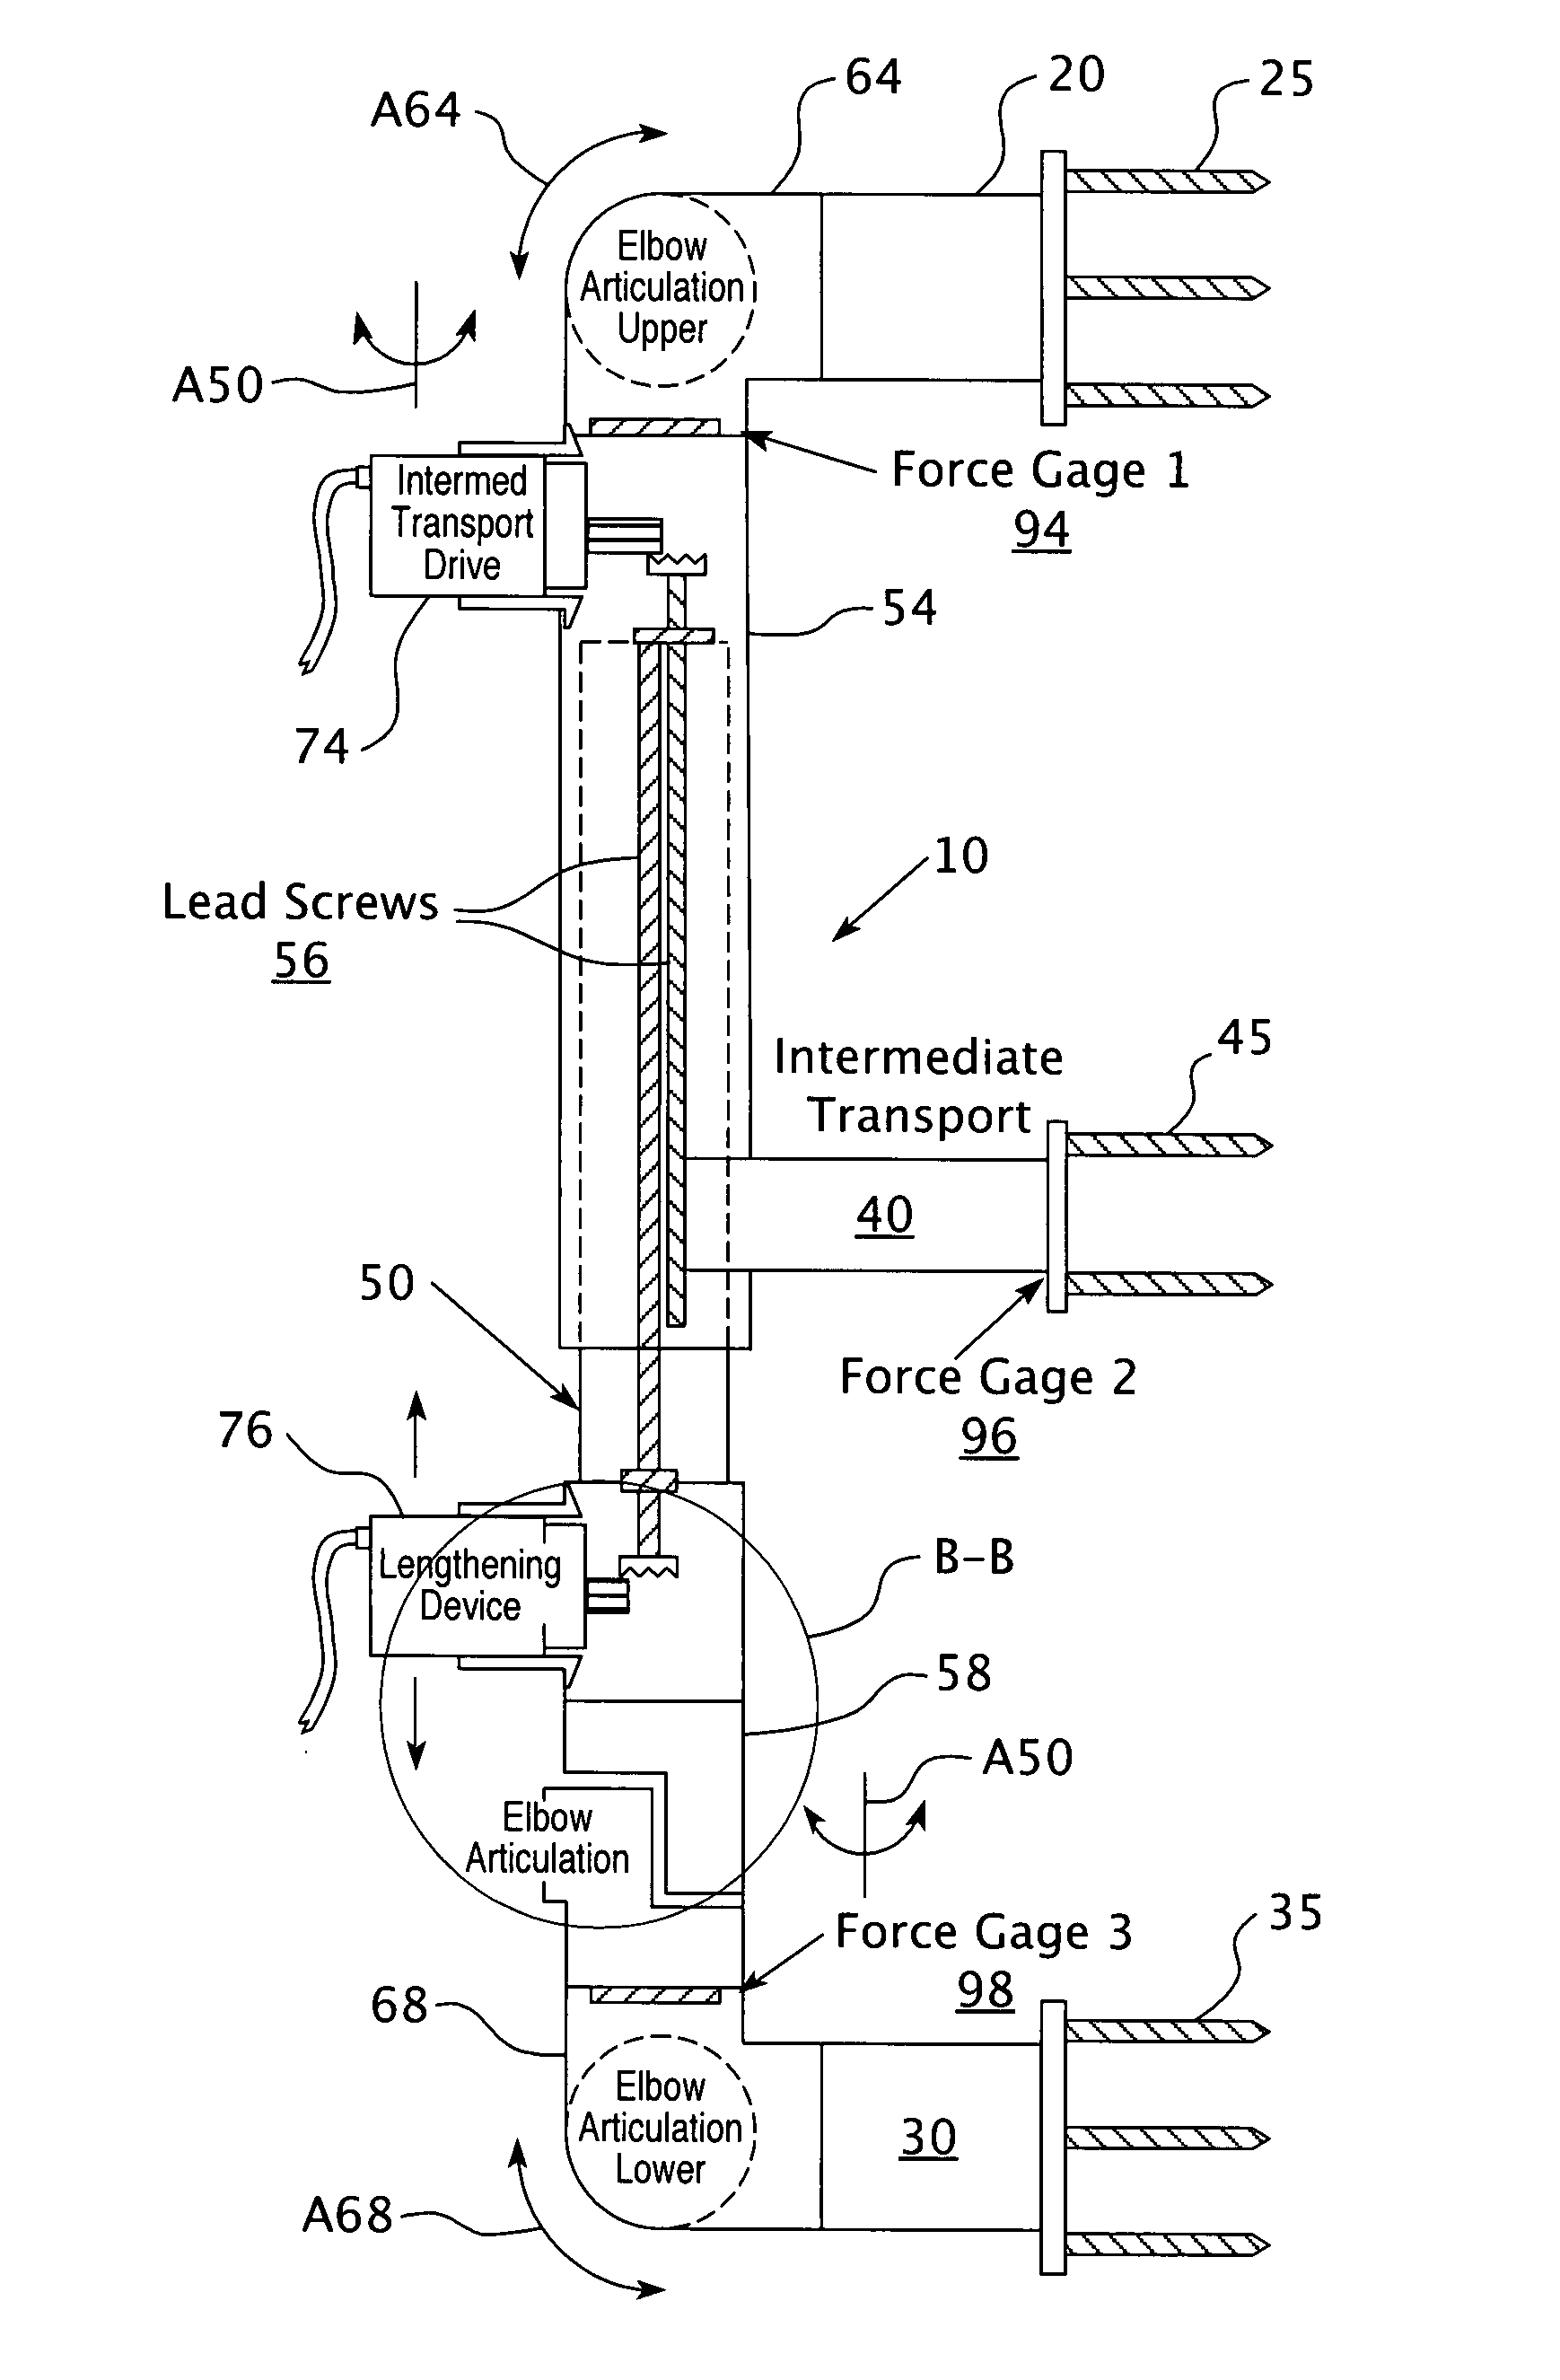 Electromechanically driven external fixator and methods of use